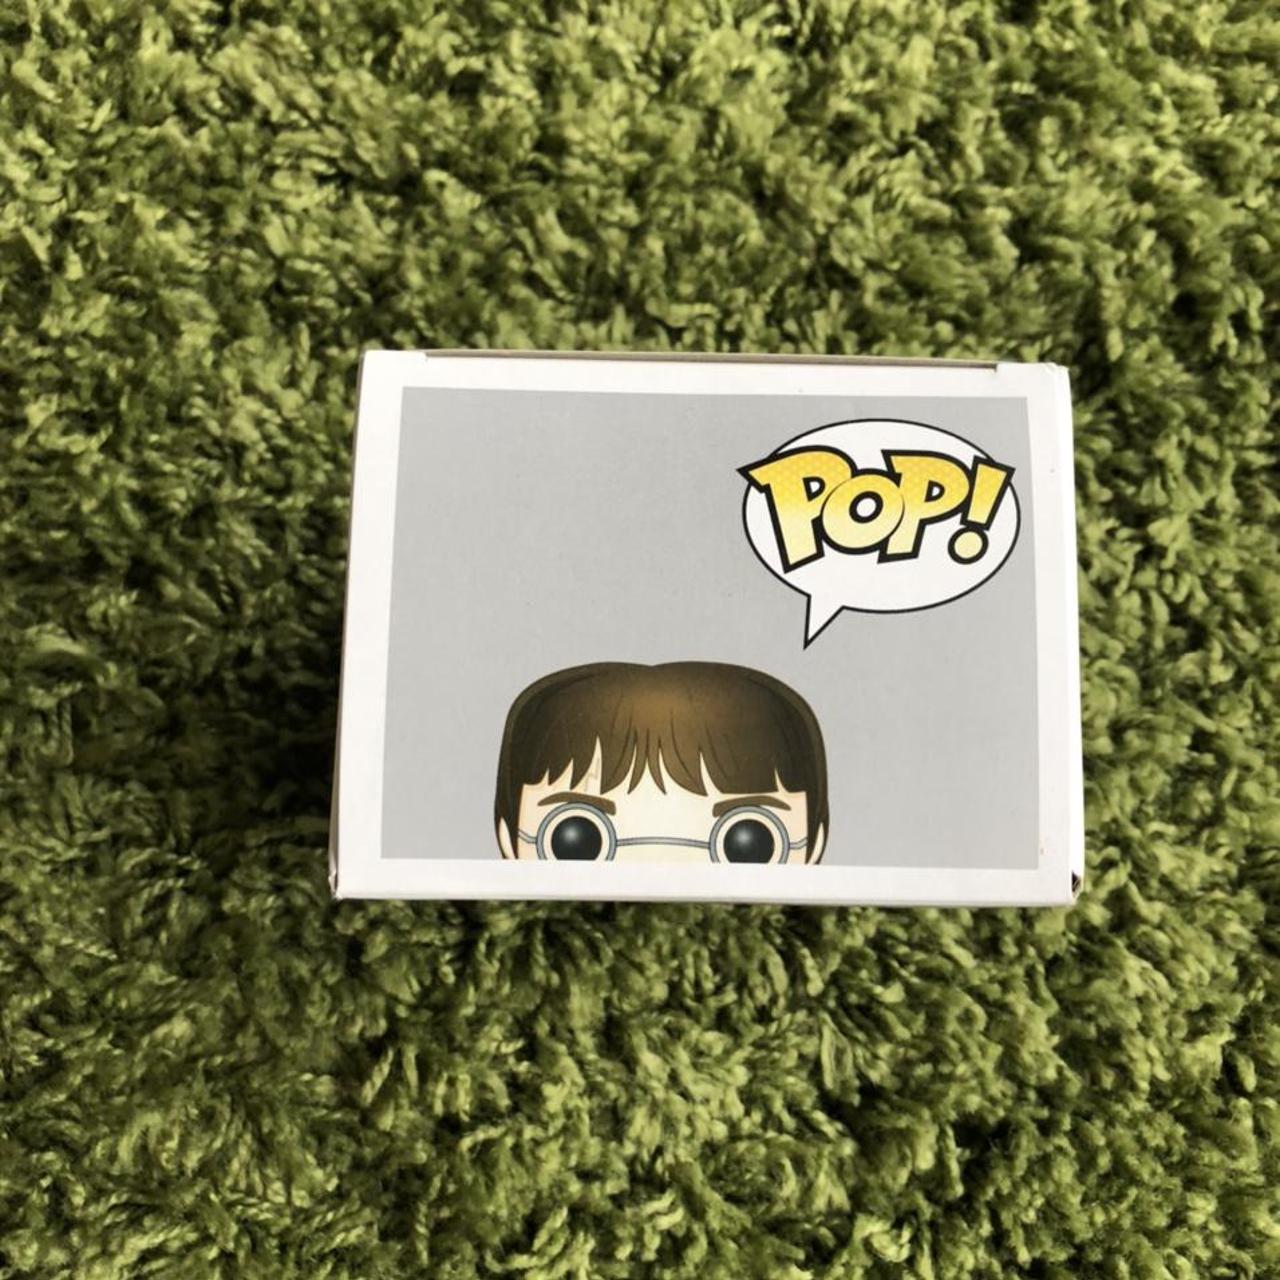 Product Image 2 - harry potter funko pop
never been